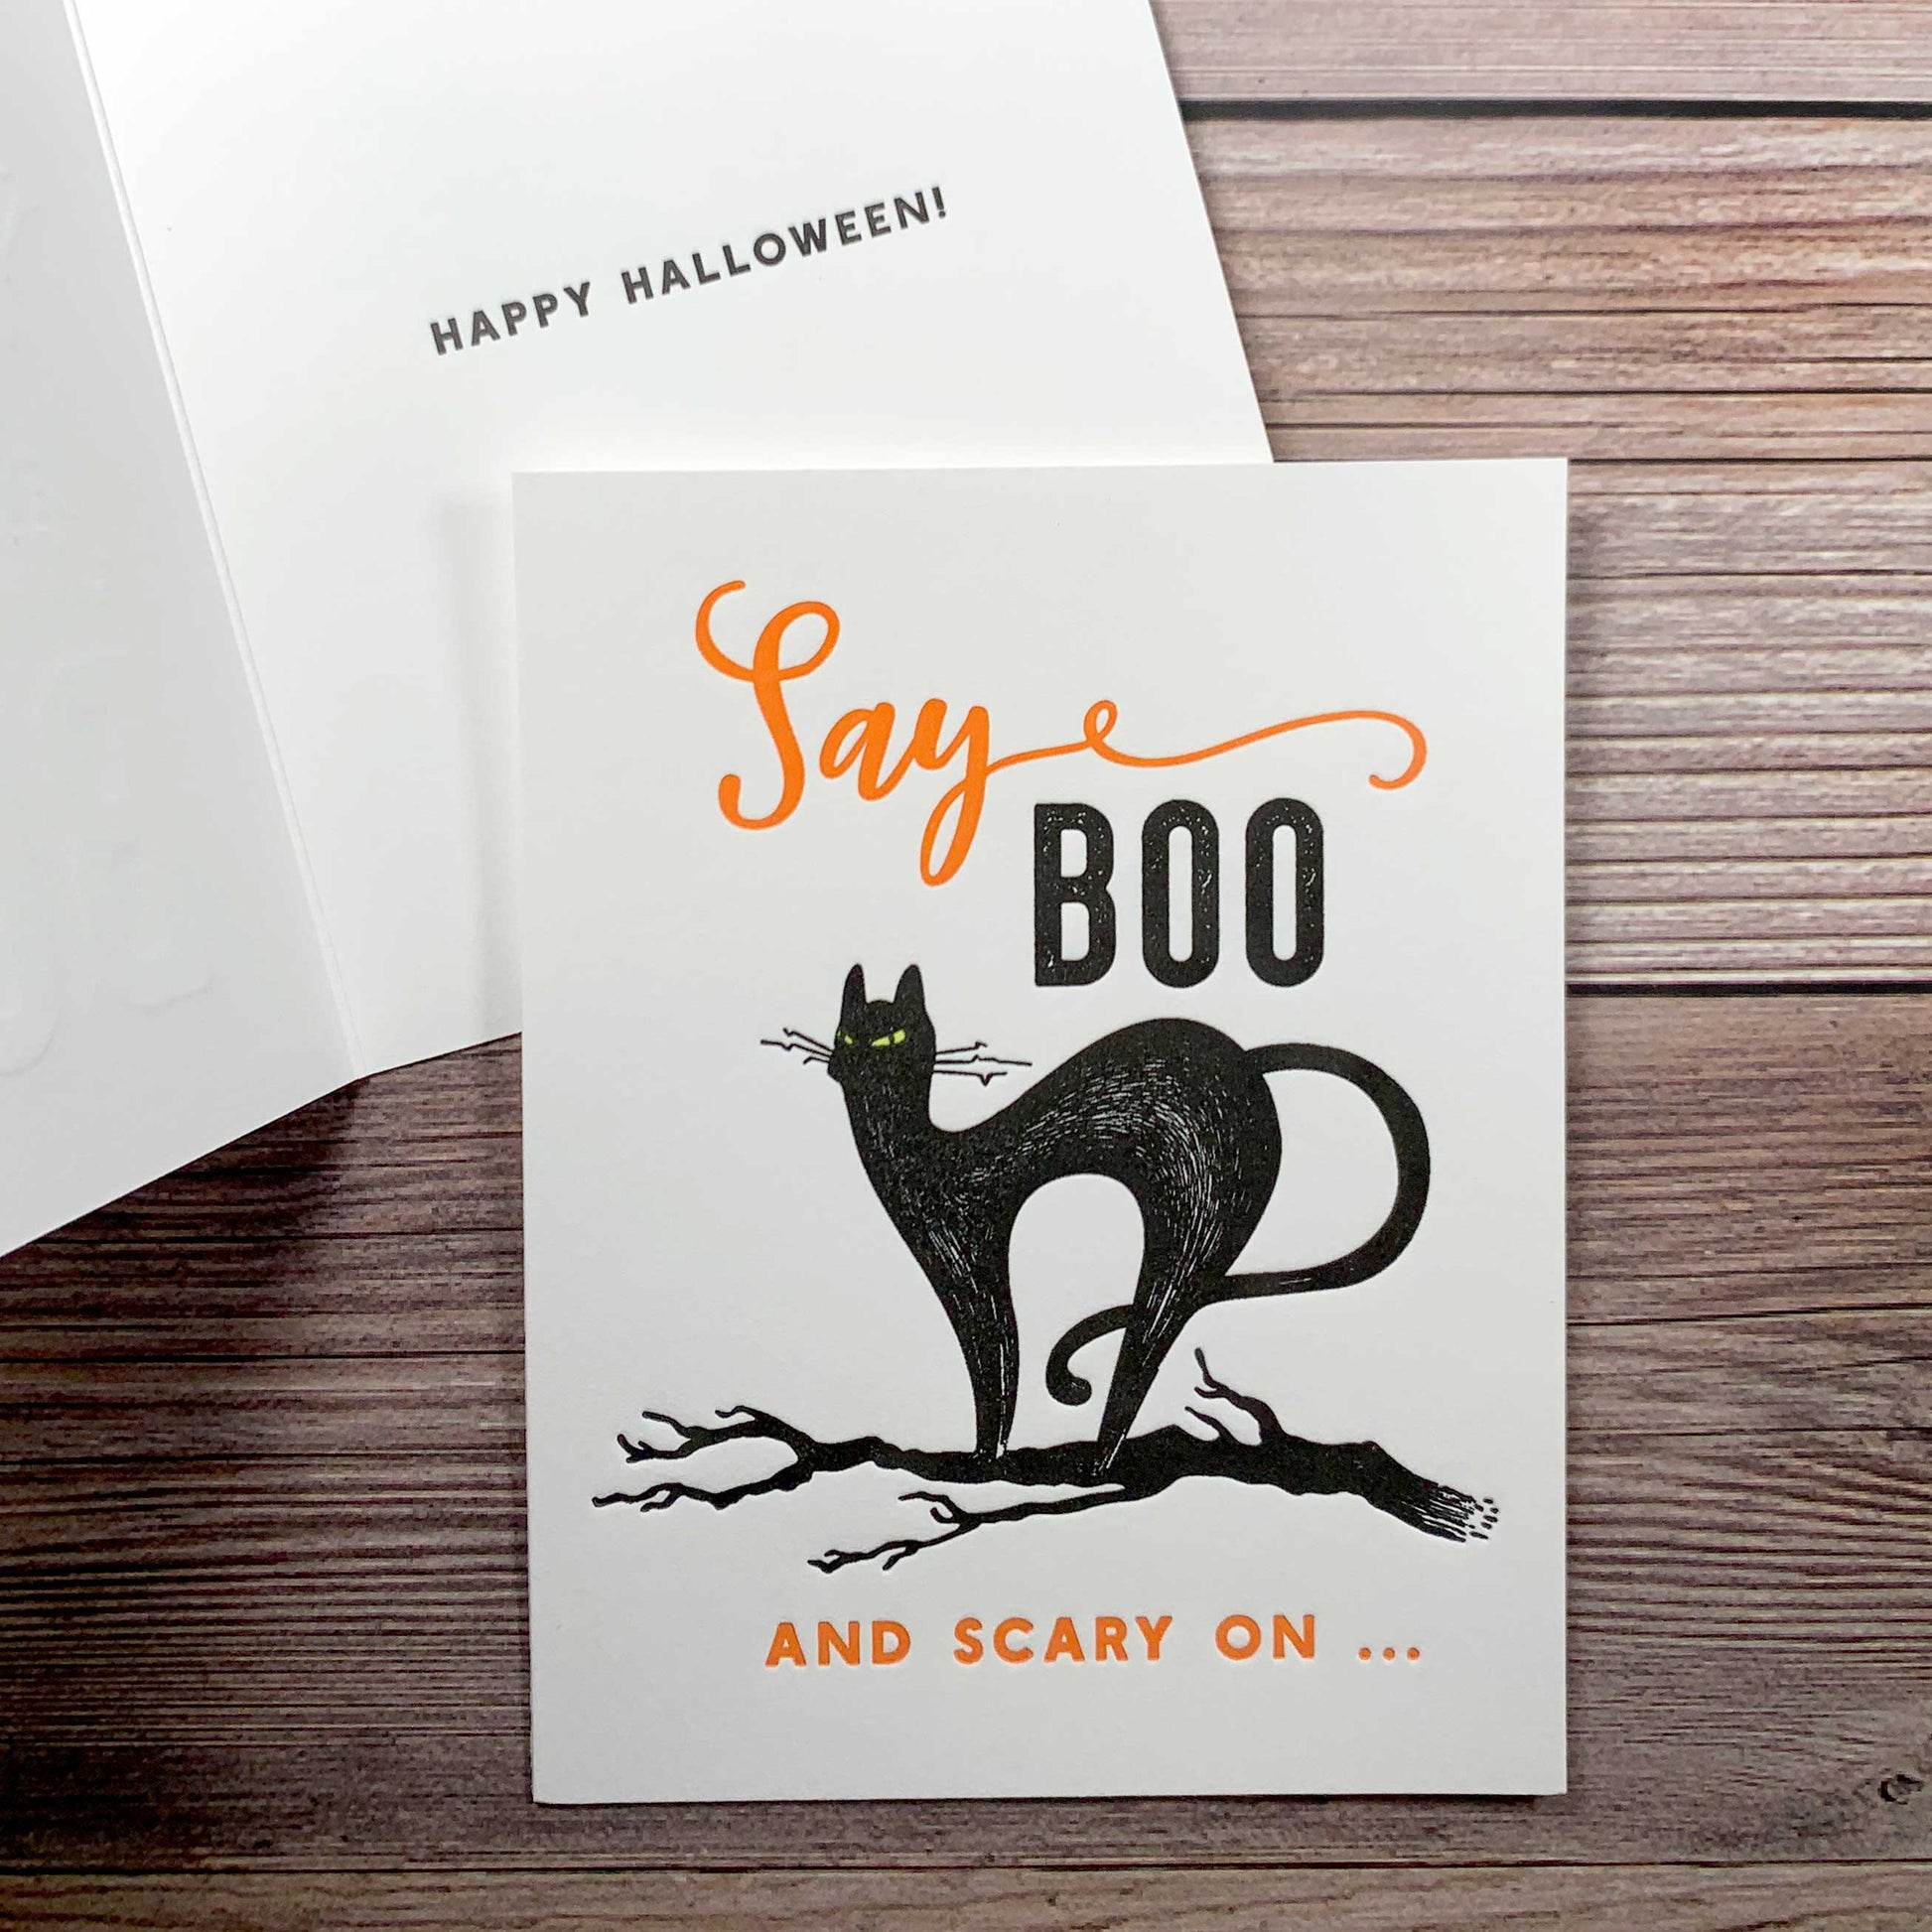 Say Boo and Scary On, Black cat, Inside message: Happy Halloween, Card for Halloween, Letterpress printed, includes envelope